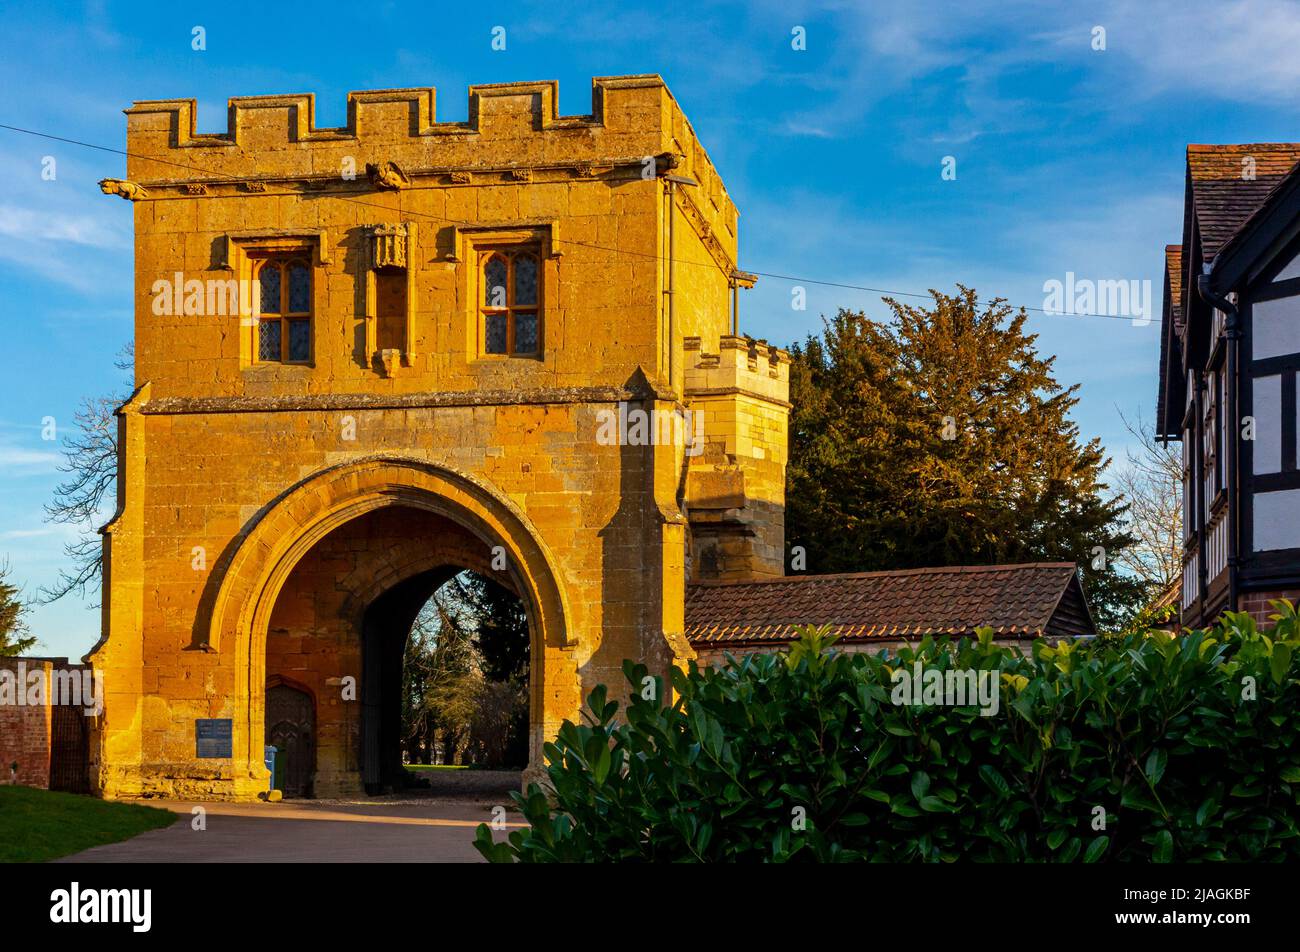 Tewkesbury Abbey Gatehouse in Gloucestershire England UK built c1500 in stone ashlar and now holiday accommodation owned by the Landmark Trust. Stock Photo